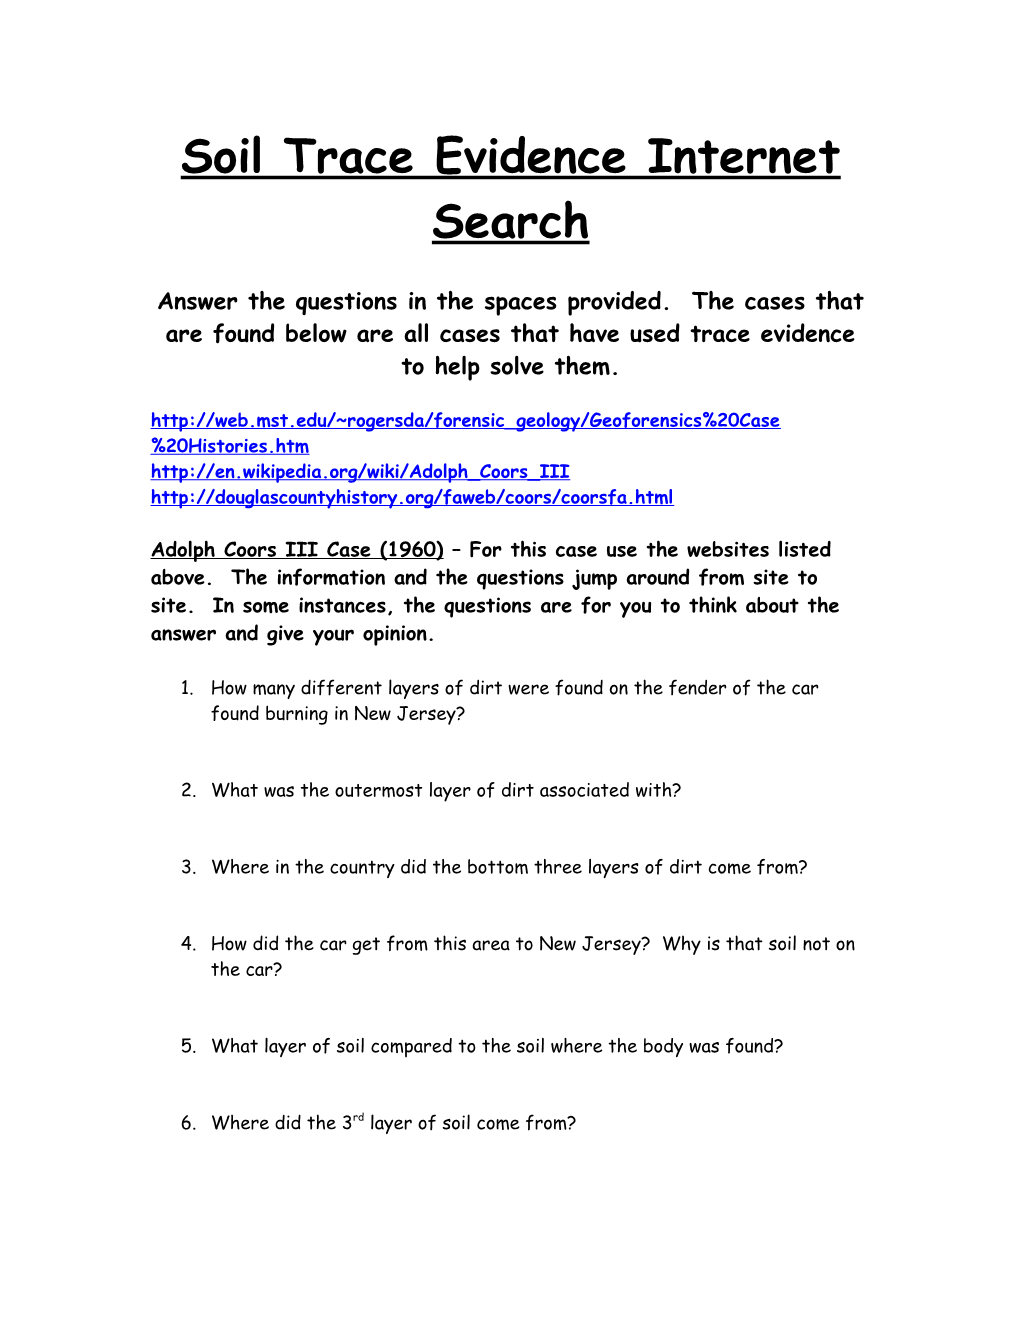 Soil Trace Evidence Internet Search